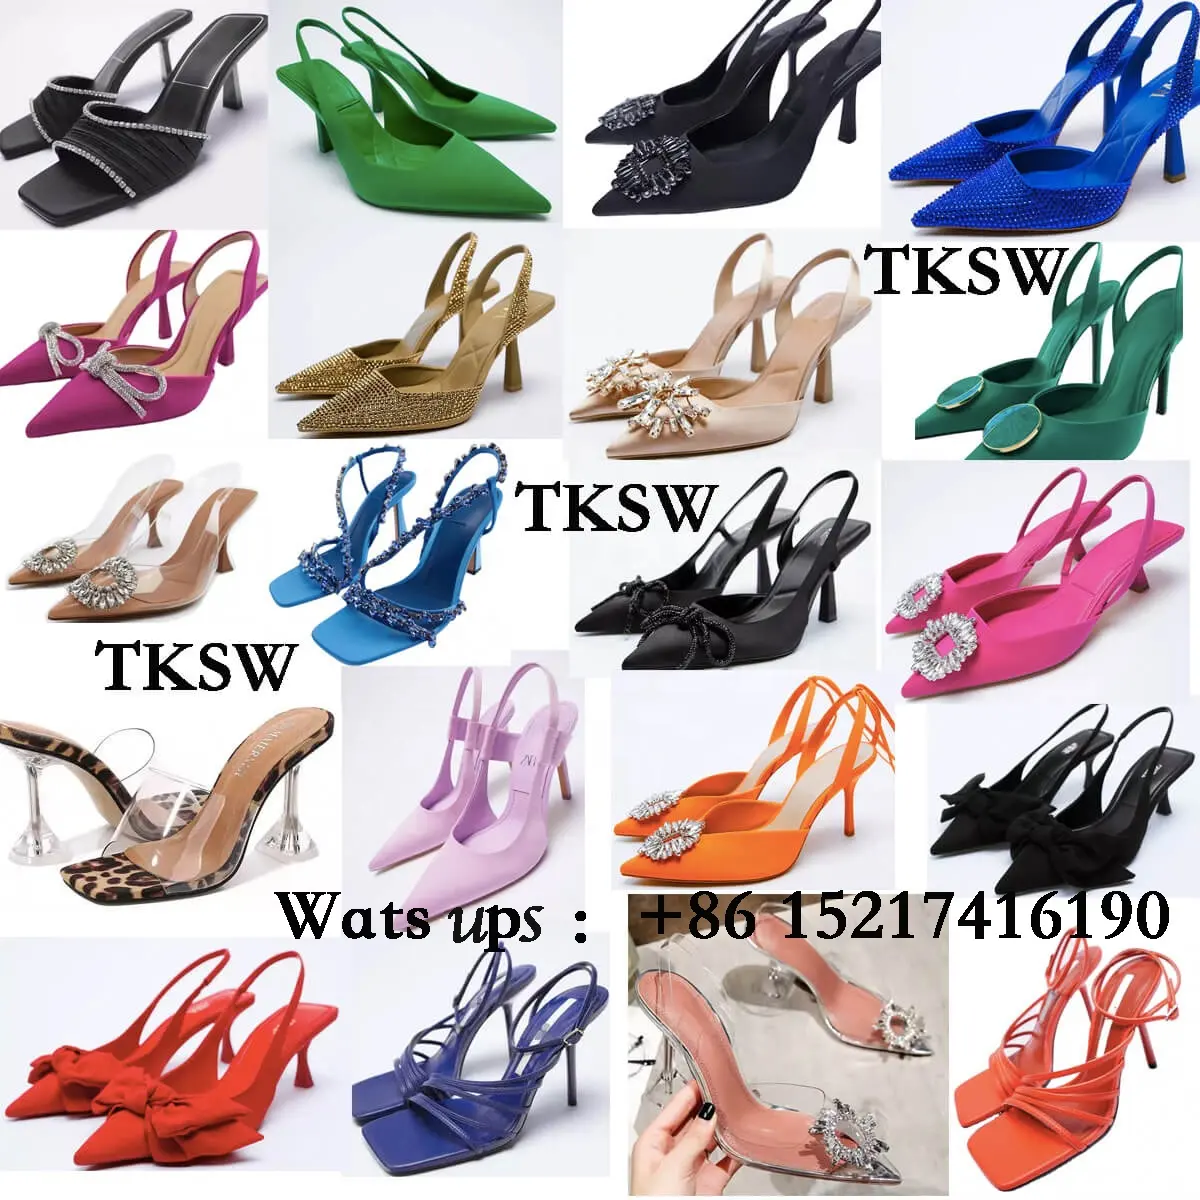 Custom Designer Shoes Women High Quality Luxury Heels Pumps Sandals Sneakers Genuine Leather Fashion Wedding Women Sexy Shoes